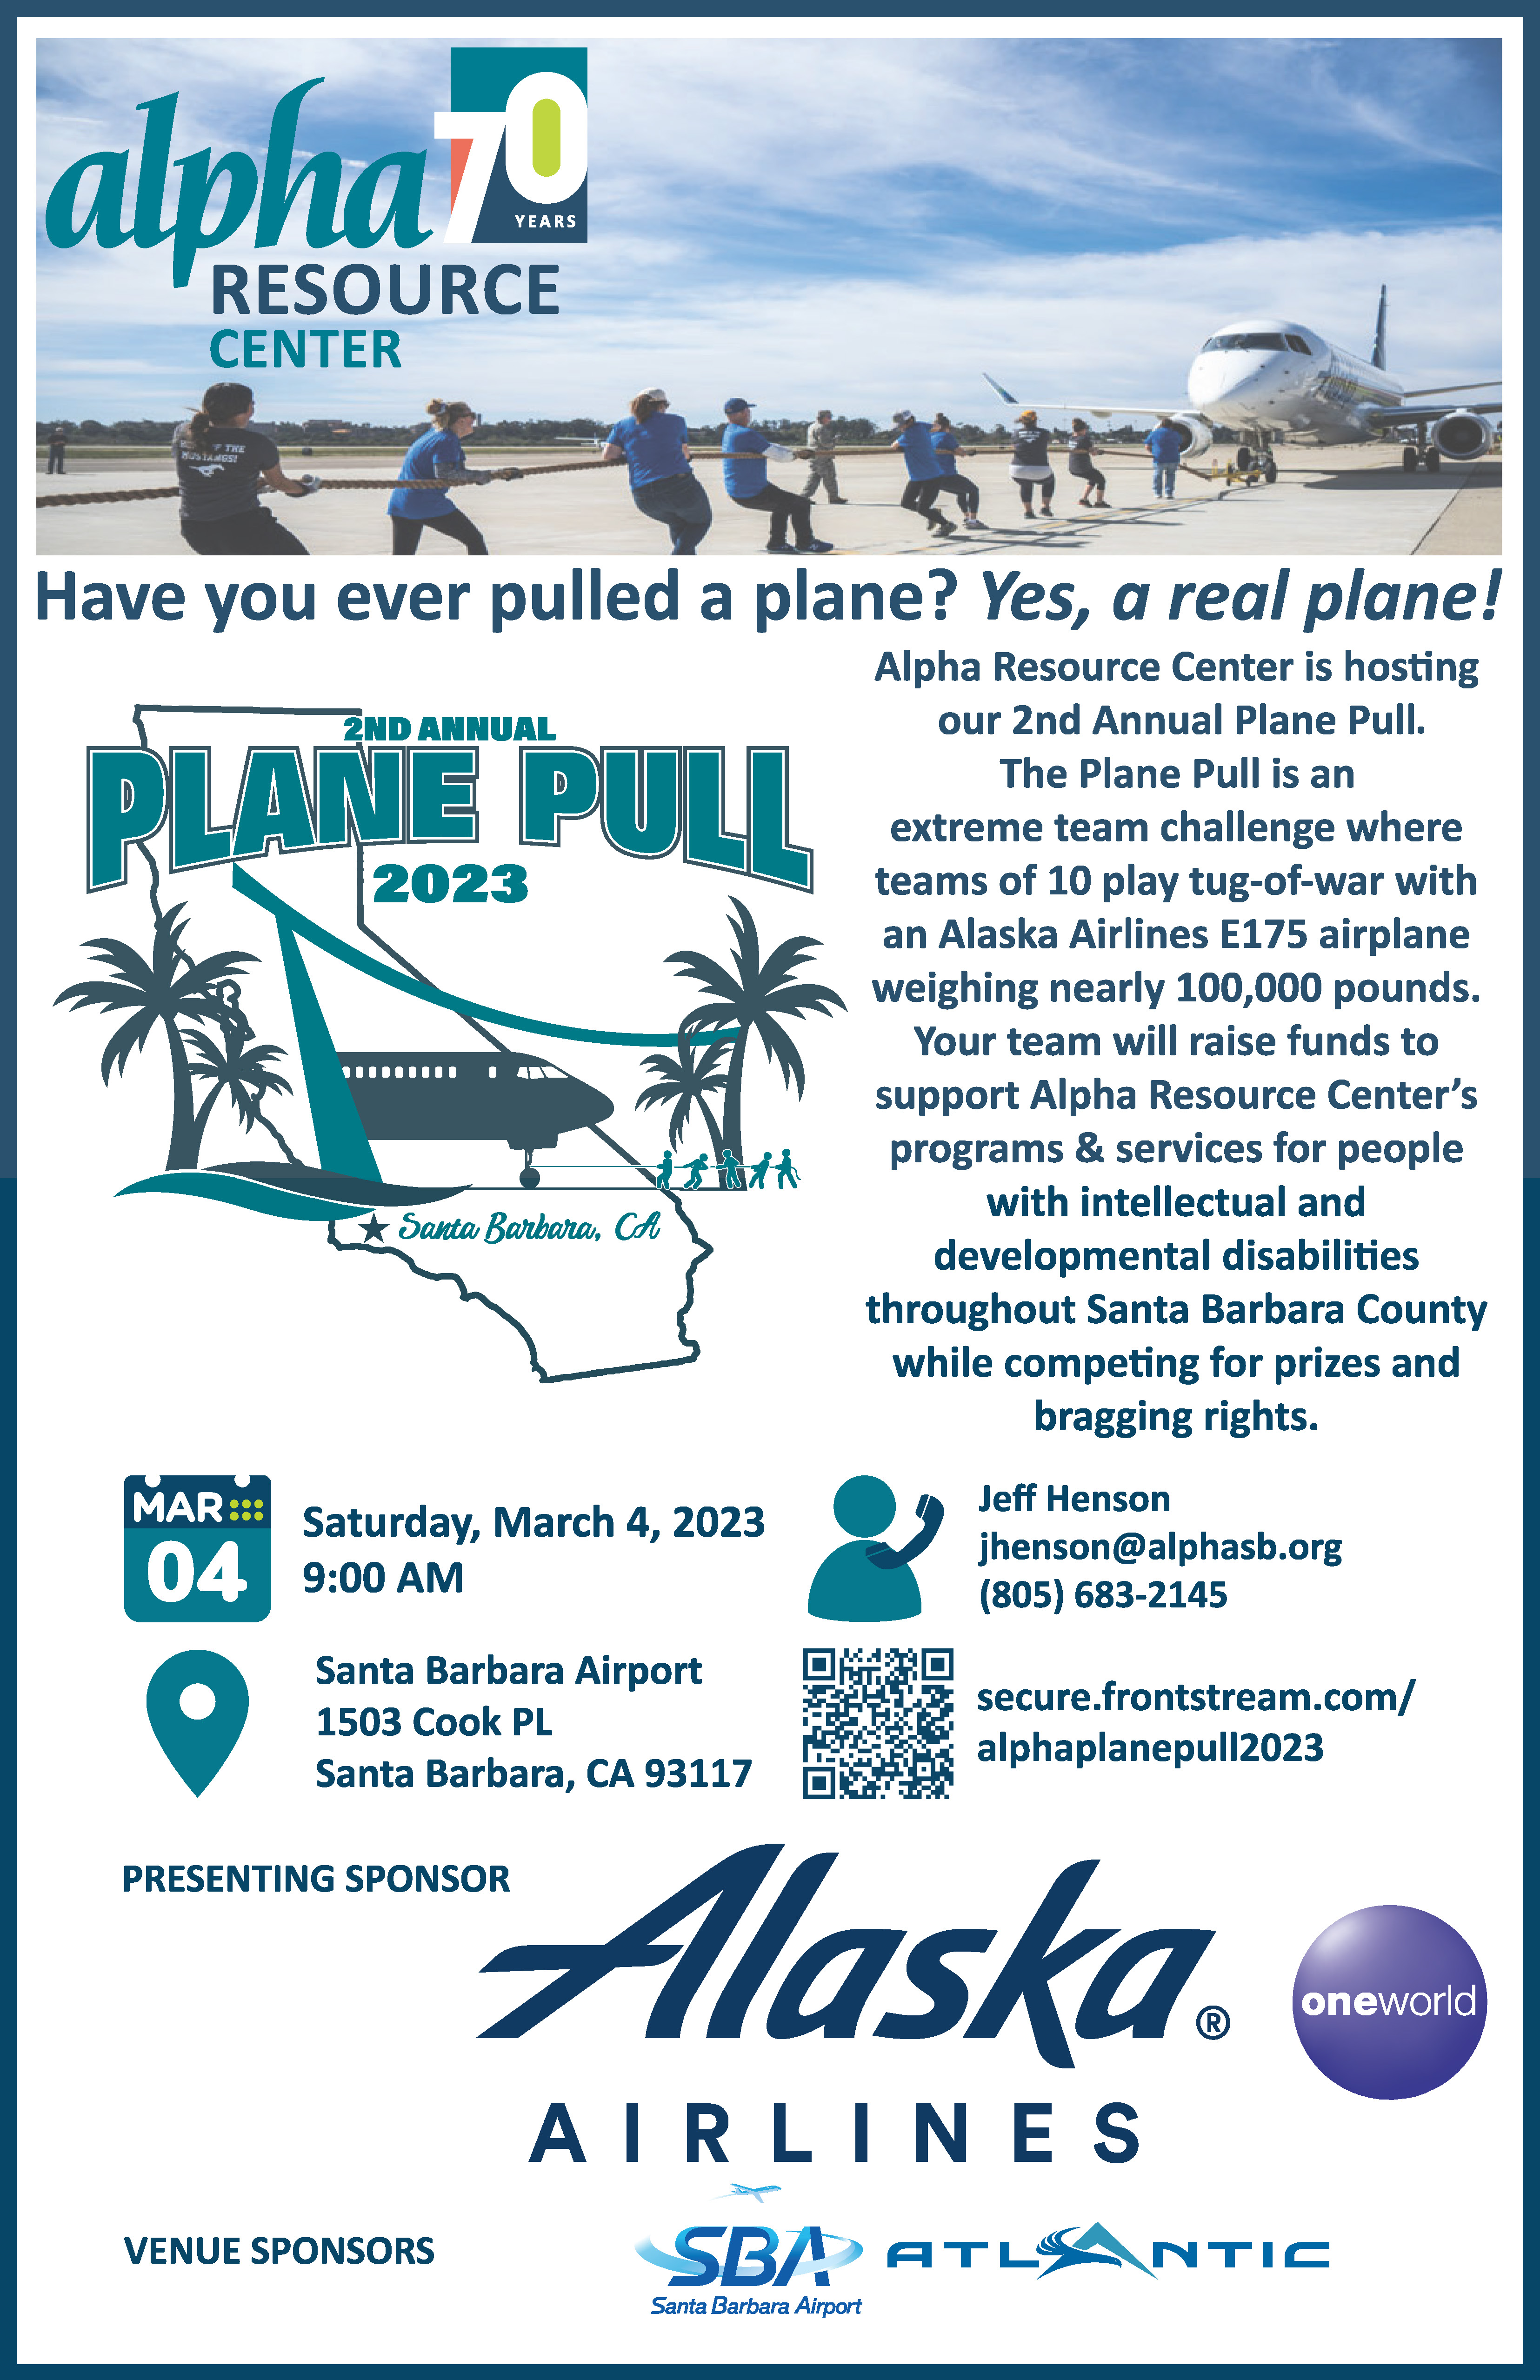 Plane Pull flyer with details about the event